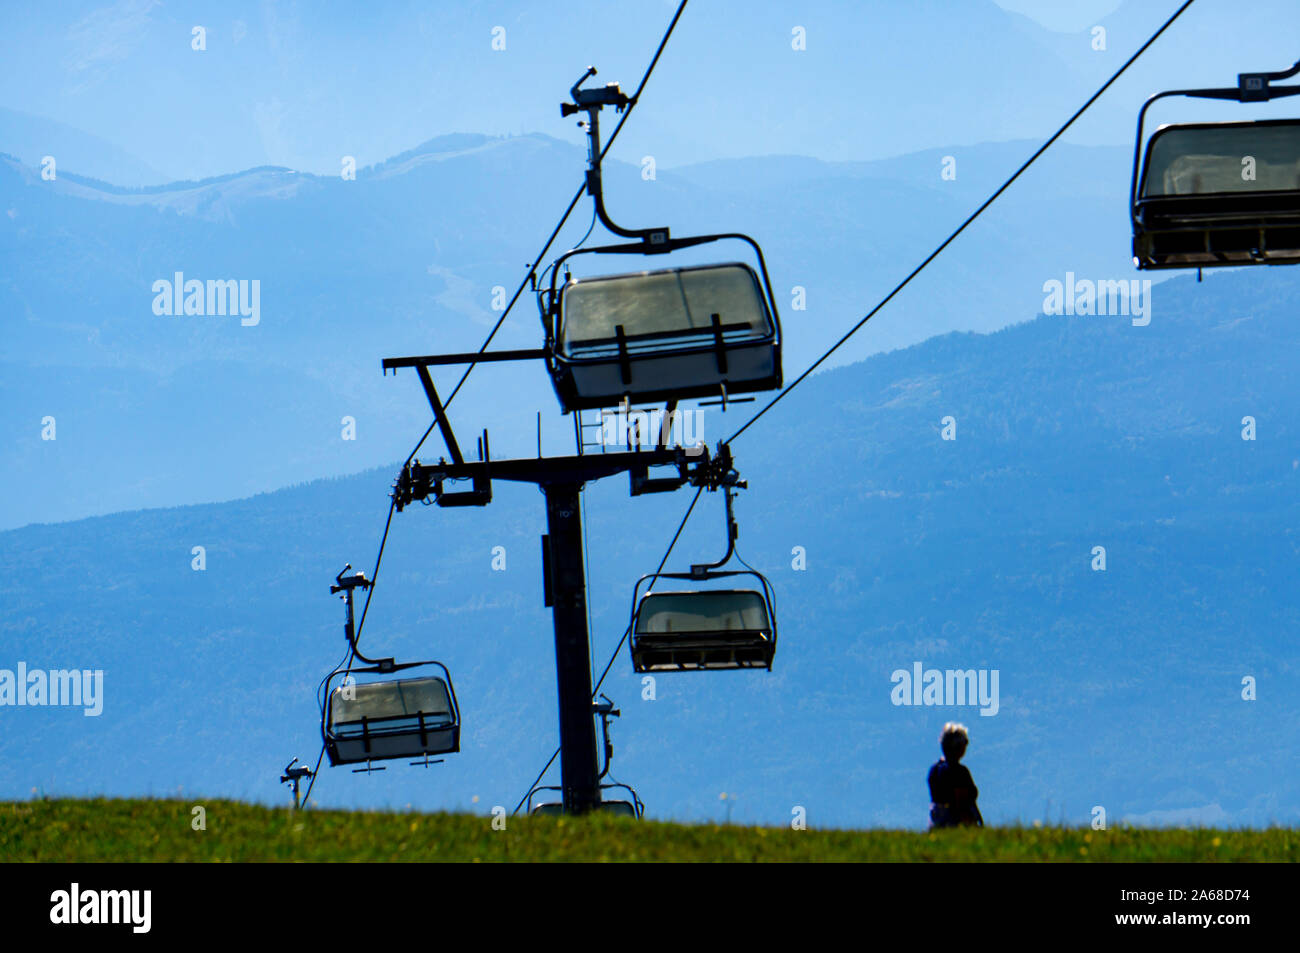 On the Gerlitzen Mountain, in Carinthia, Austria, above the Ossiacher Lake, summit station, Chair lift lift, Stock Photo